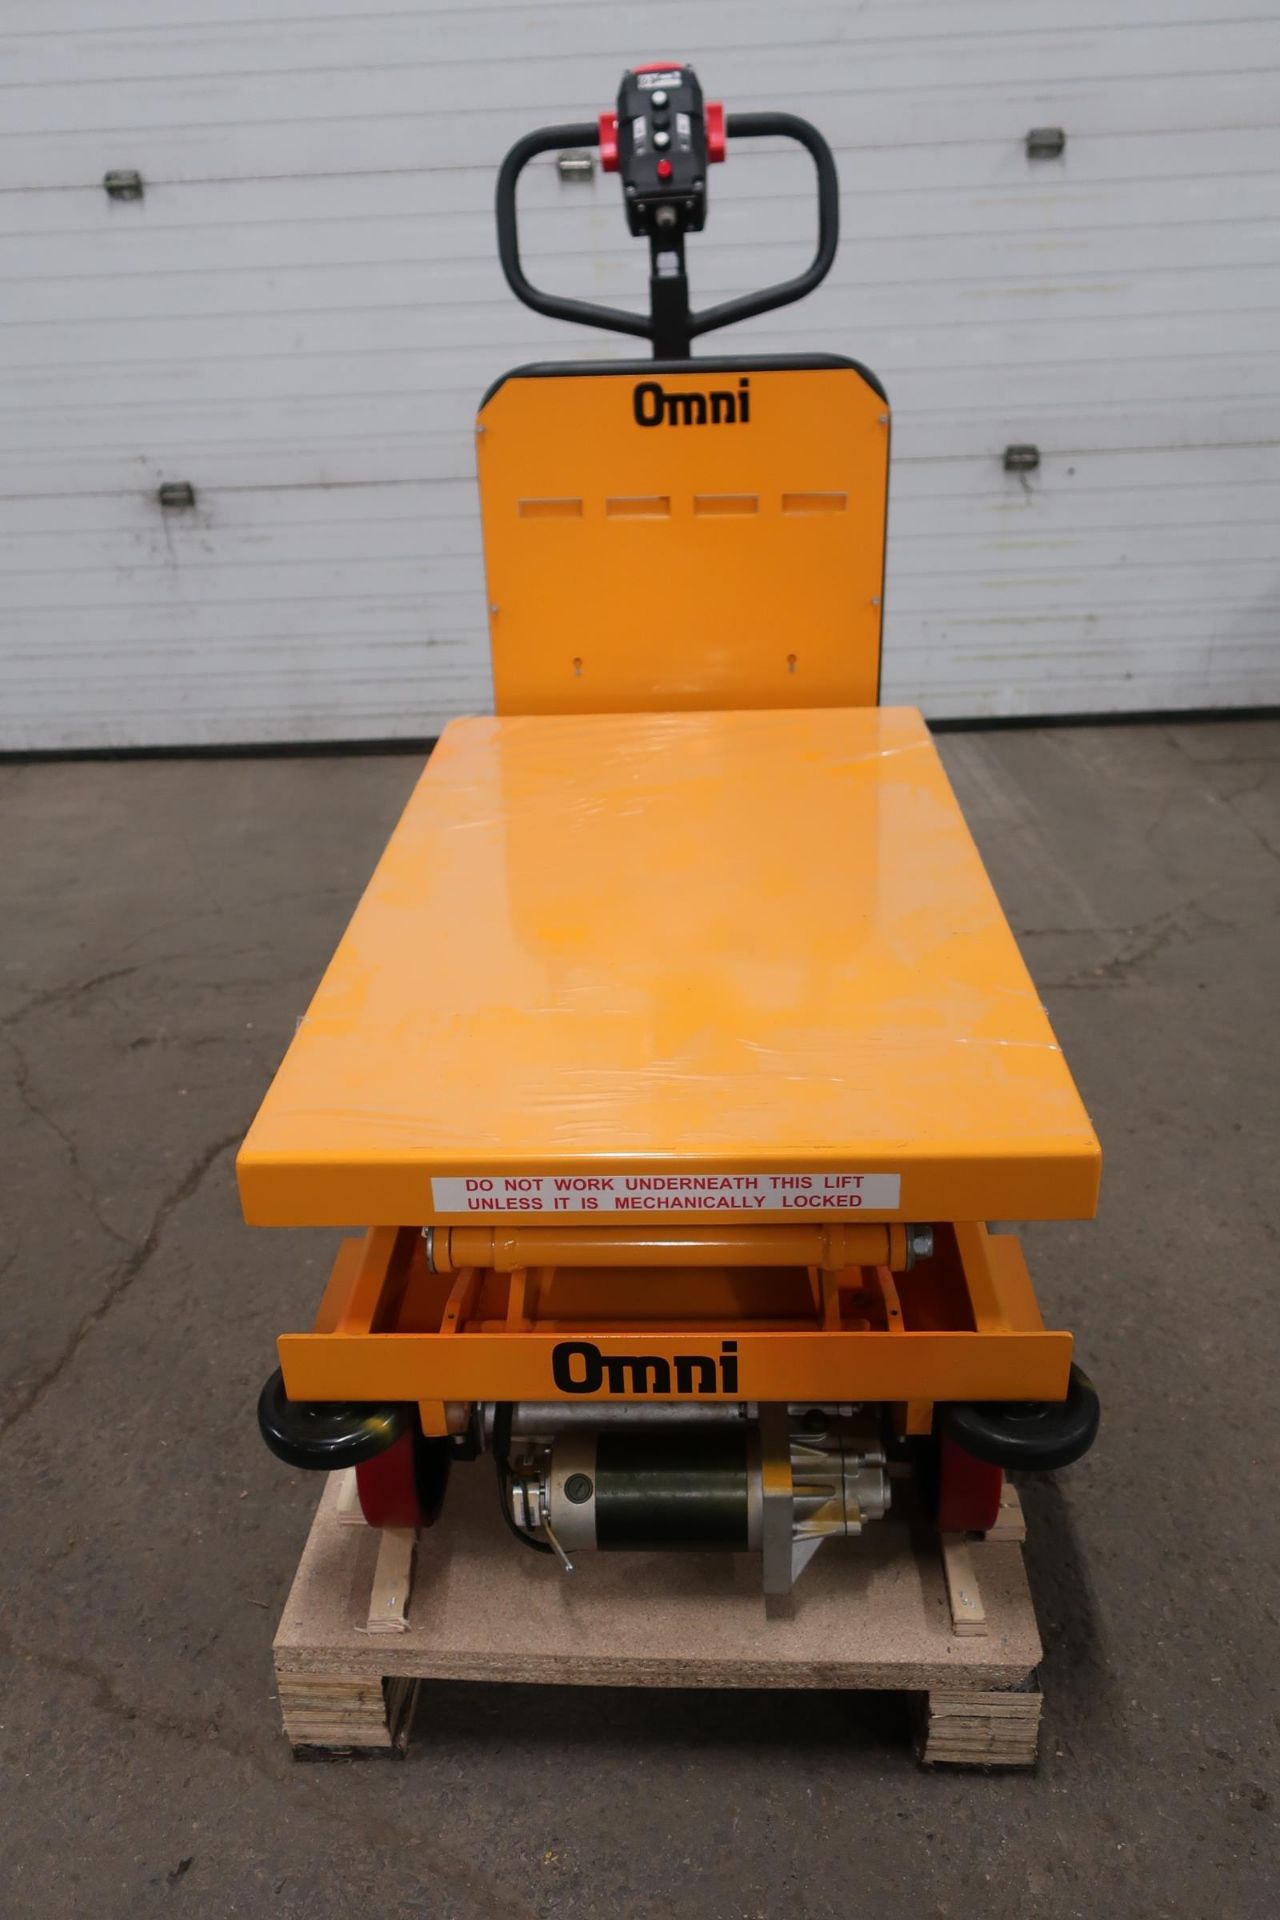 MINT Omni Motorized Lift Table Platform 500kg / 1100lbs capacity and 1720mm / 68" Lift Height UNUSED - Image 3 of 3